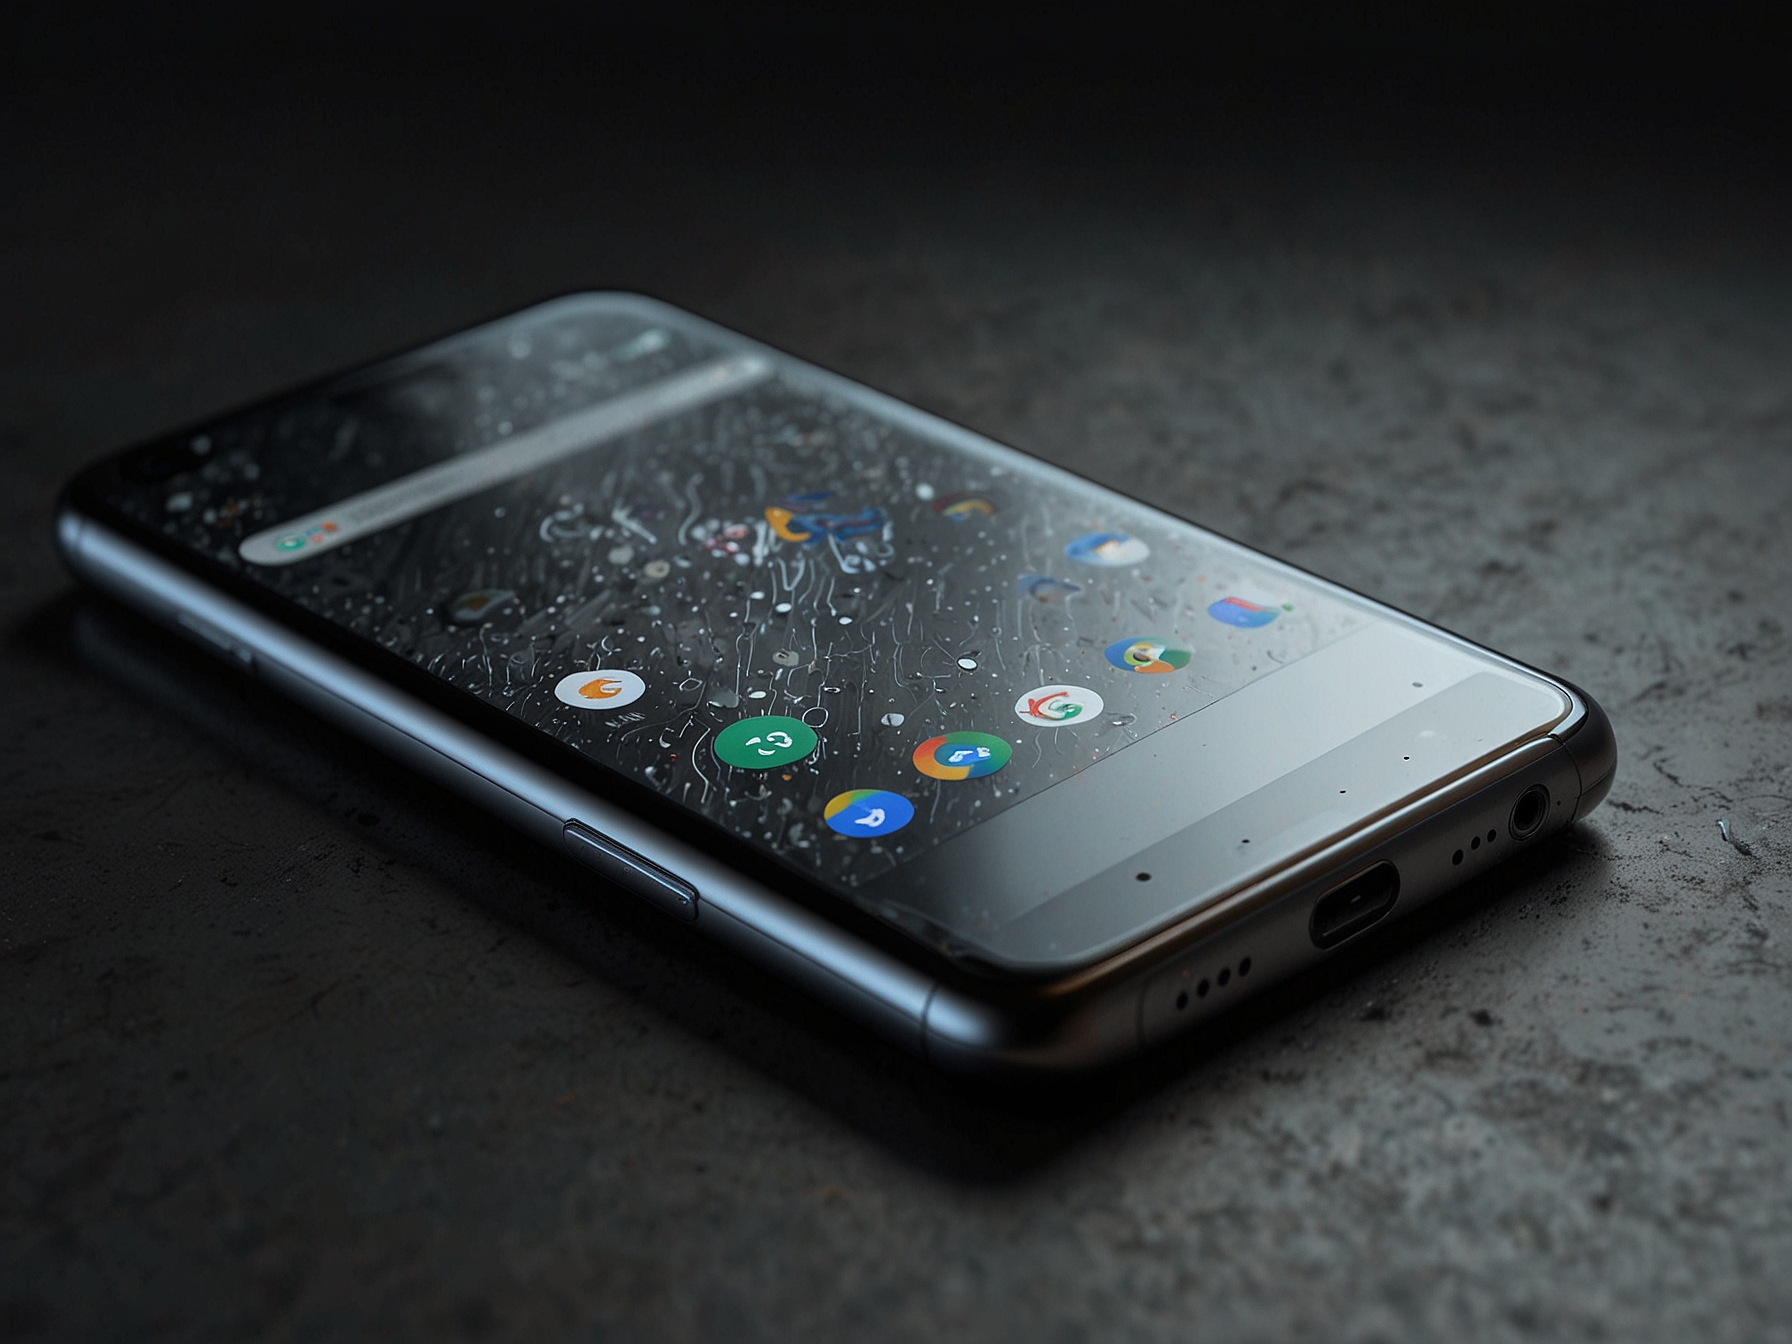 A concept image of the Google Pixel 9 with annotations showcasing its expected specifications, including the Tensor G4 chip, 8GB RAM, and ARM architecture.